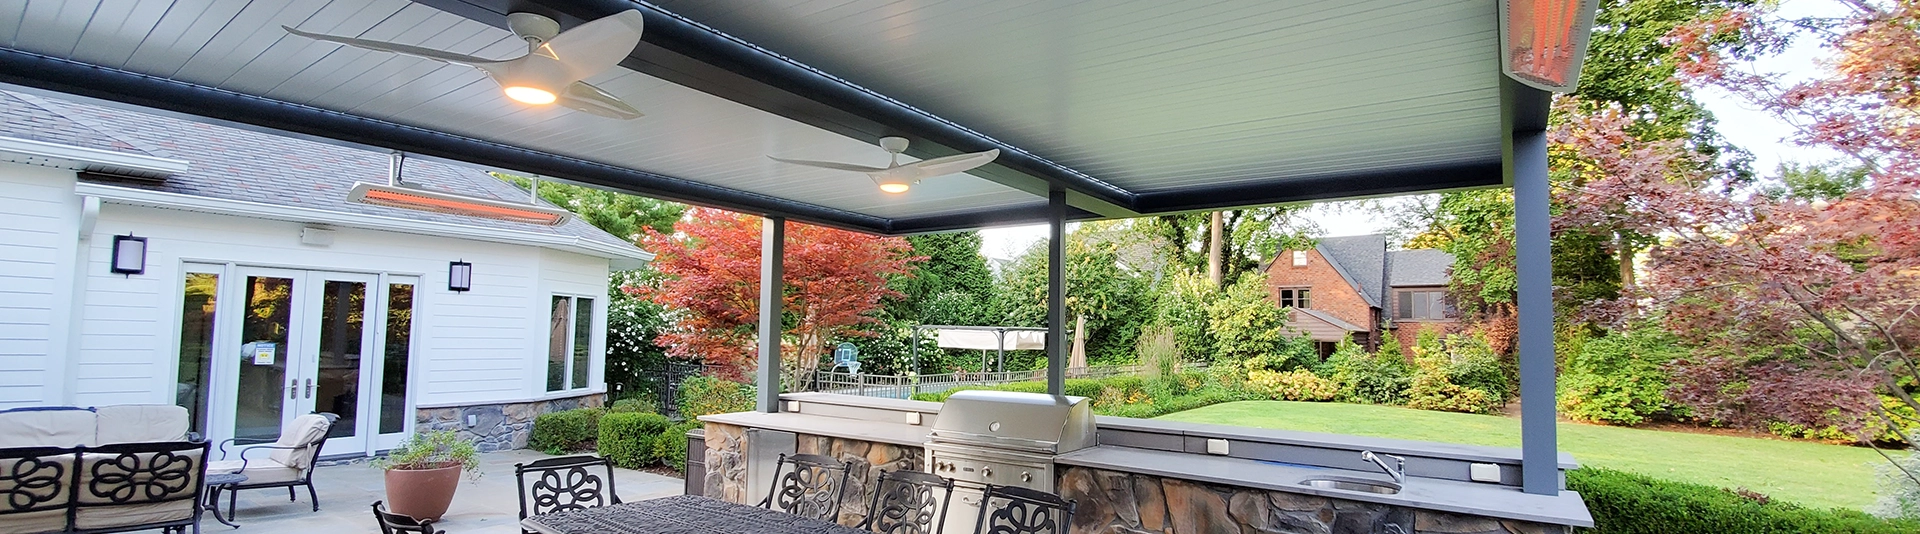 Louvered Patio Cover Over Modern Outdoor Cooking and Dining Area